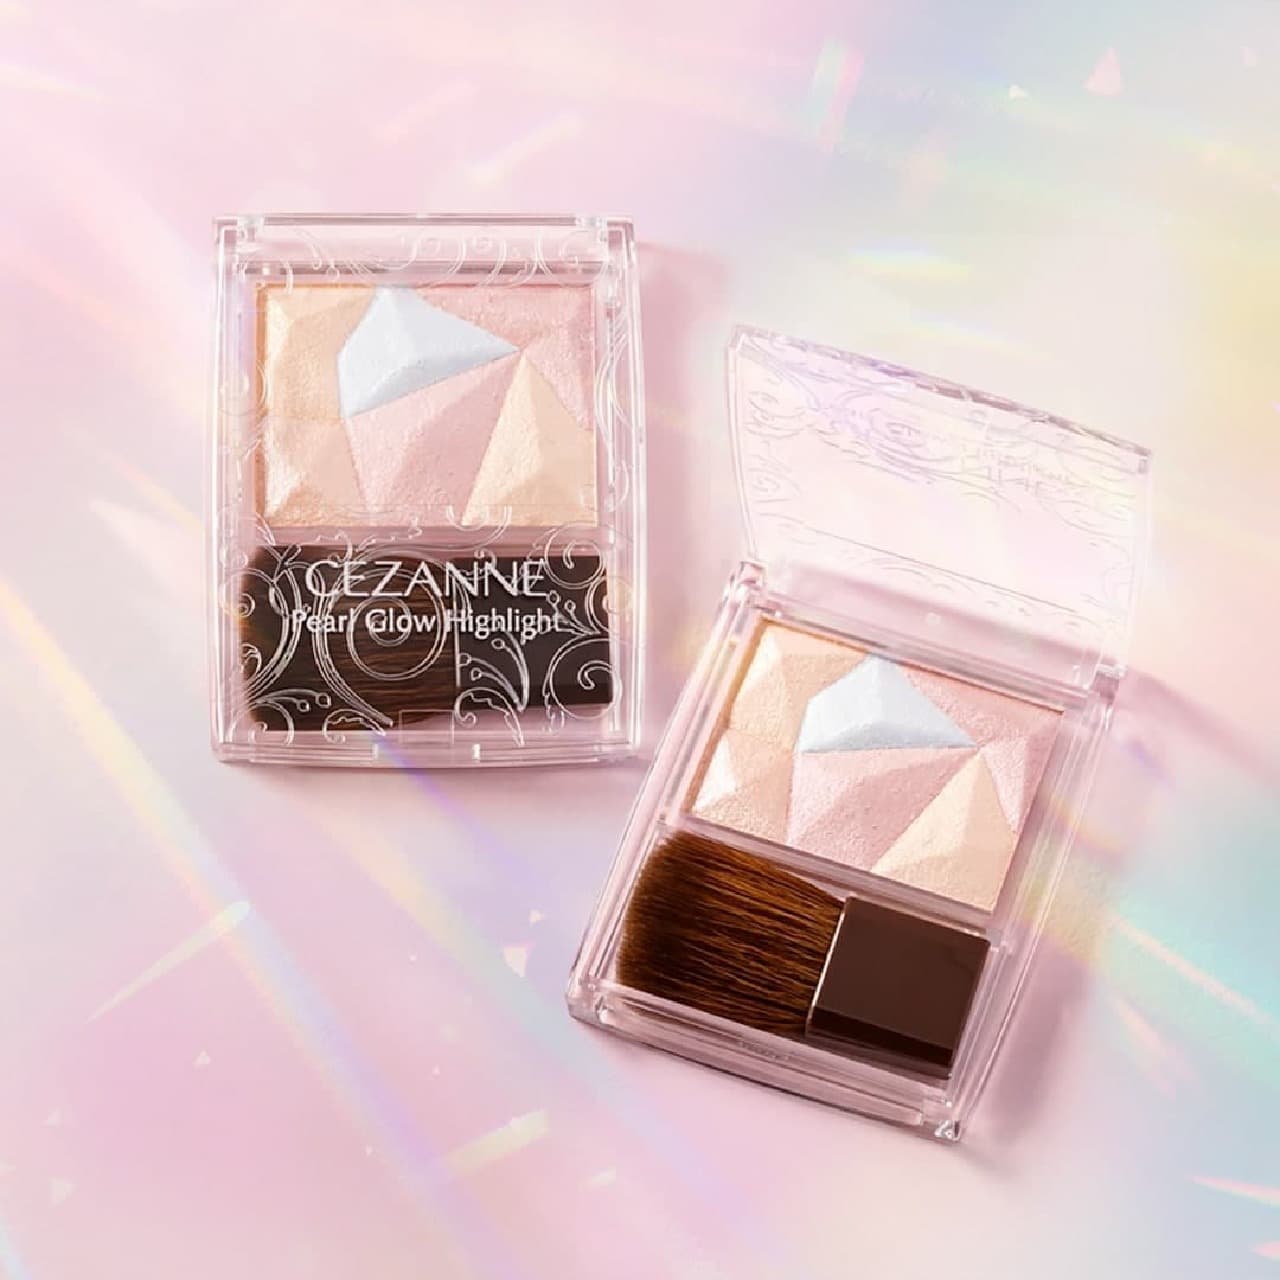 Limited edition color "SP1 Aurora Prism" for "Sezanne Pearl Glow Highlight